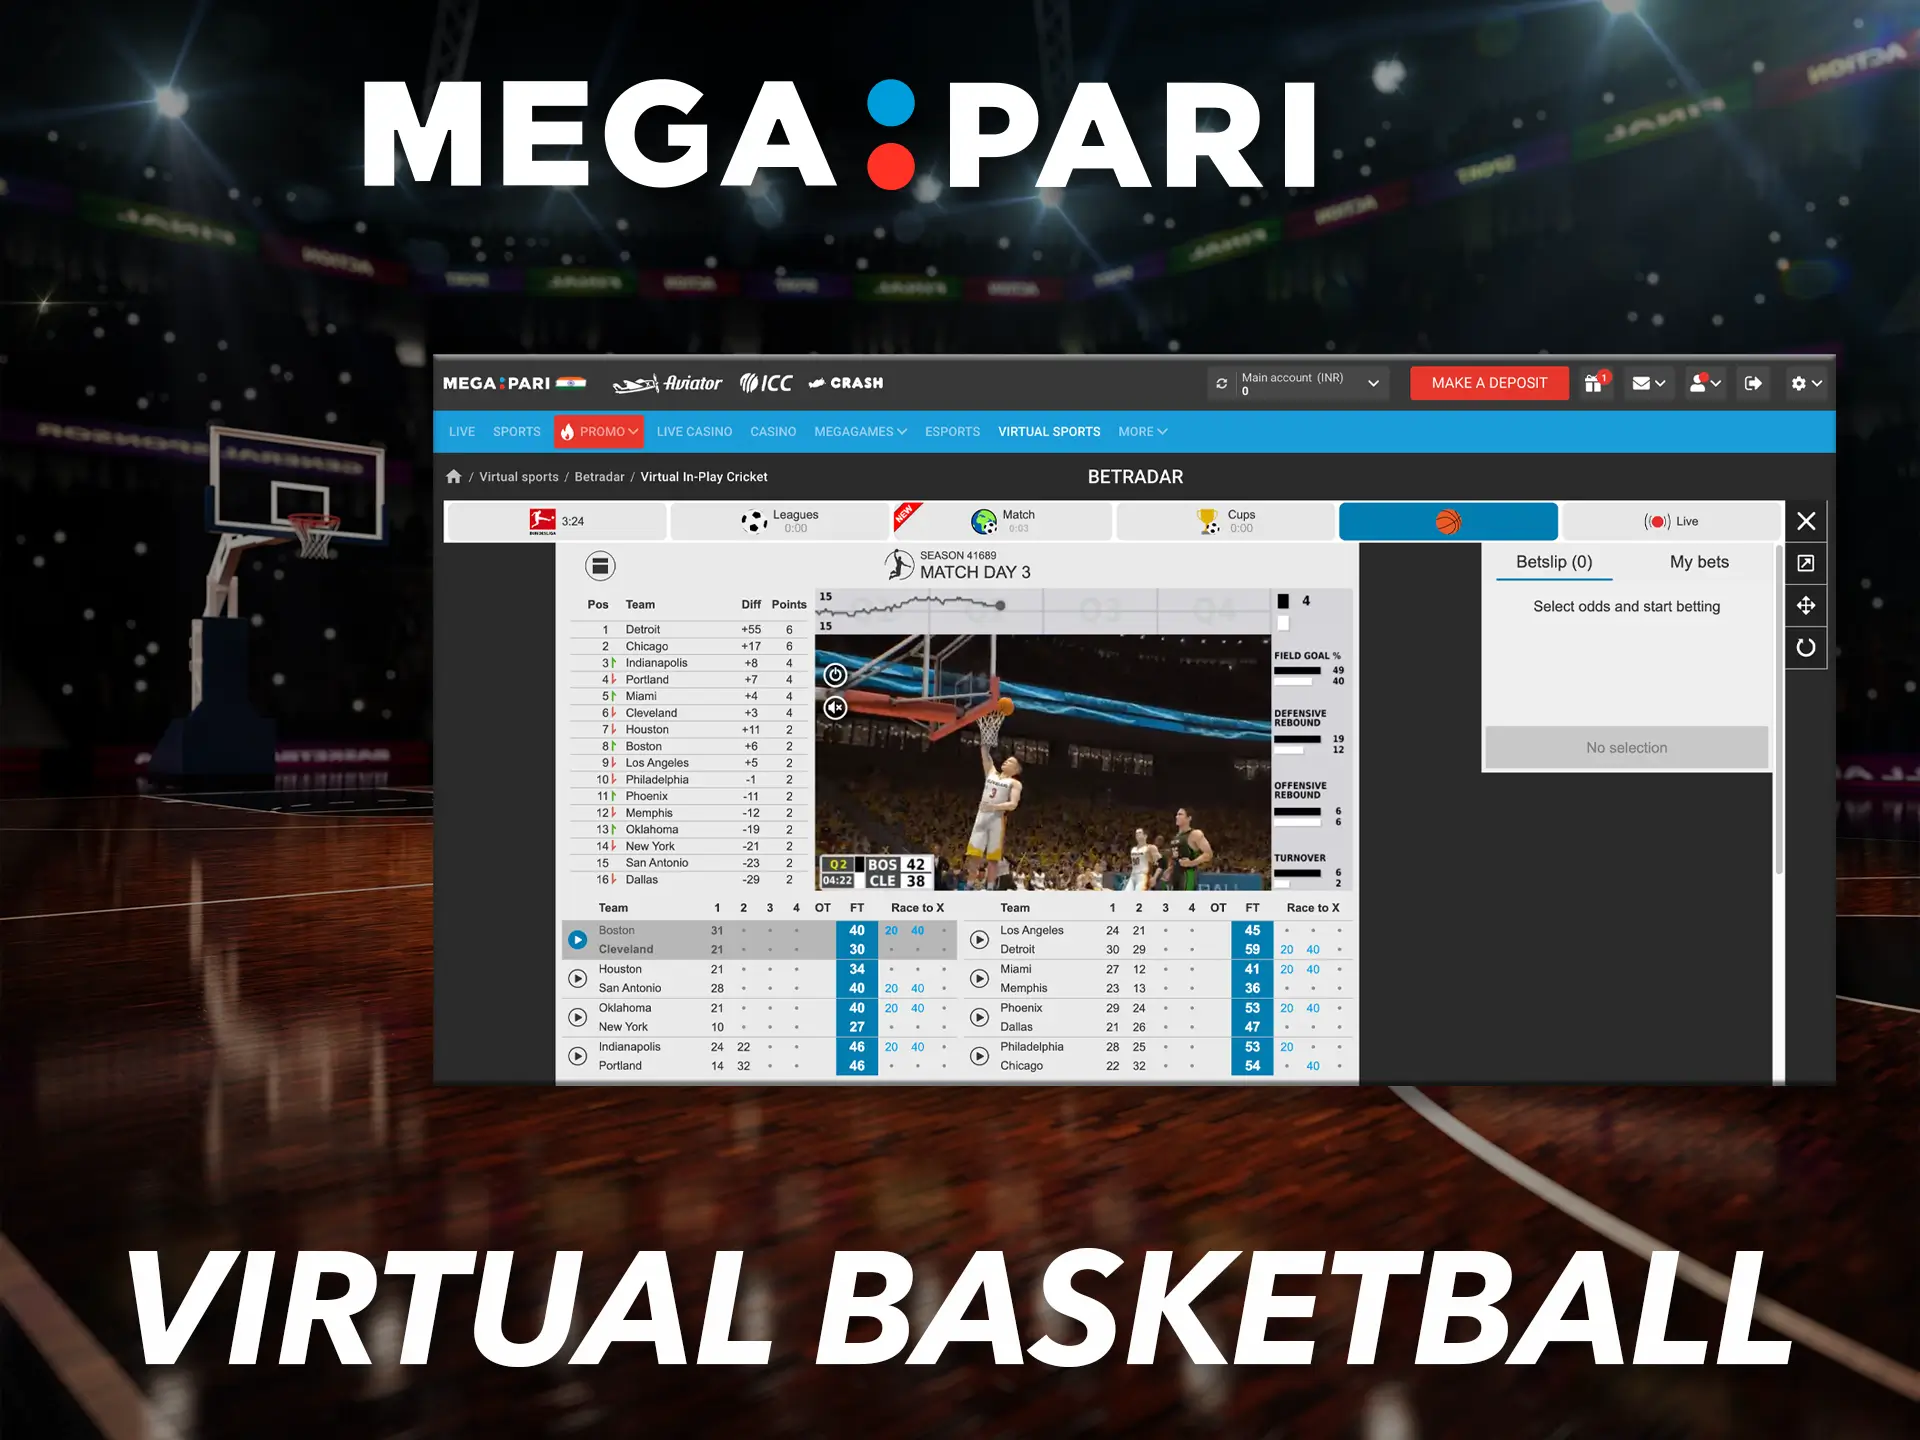 Predict the team's victory in virtual basketball from Megapari.